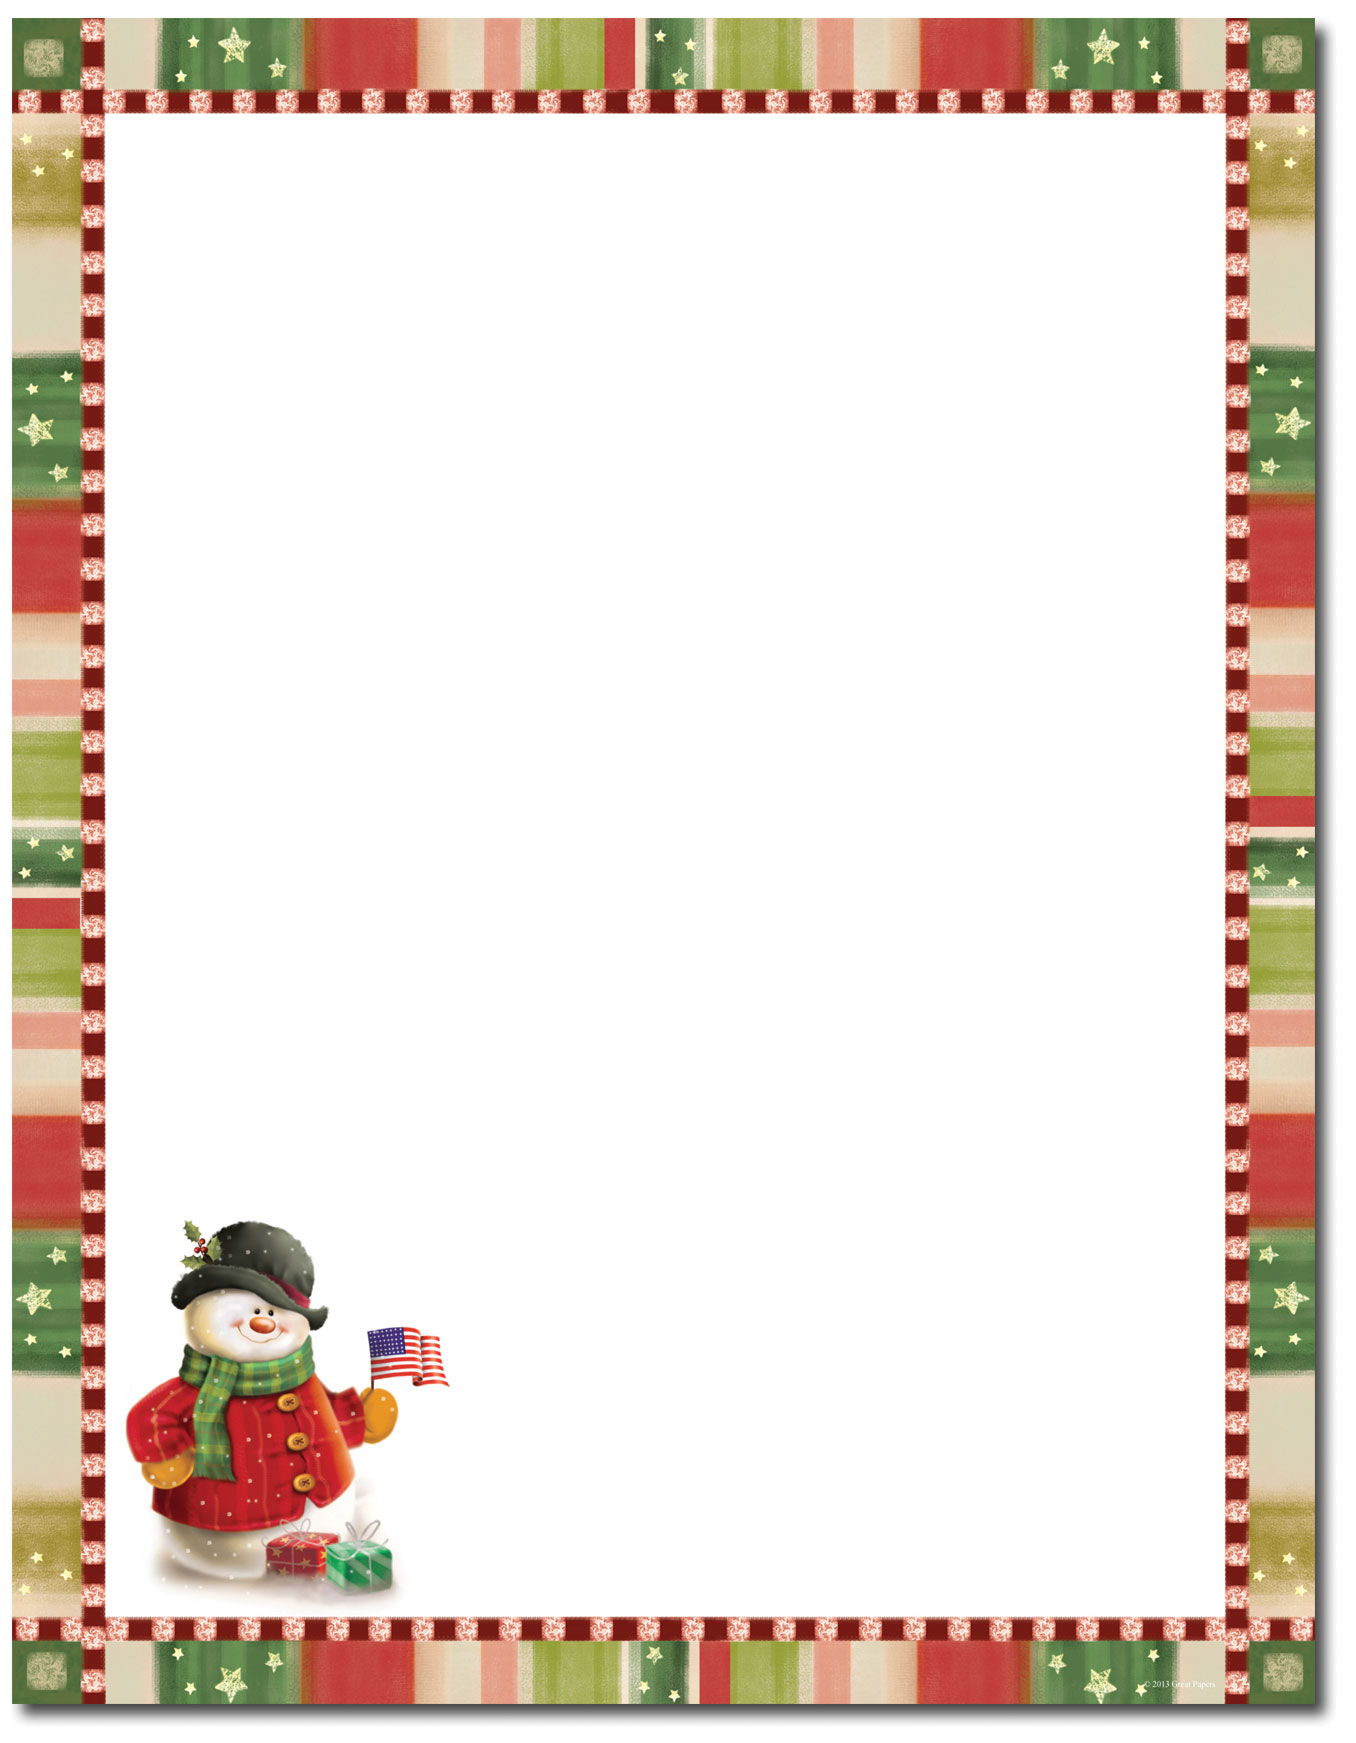 free-christmas-stationary-cliparts-download-free-christmas-stationary-cliparts-png-images-free